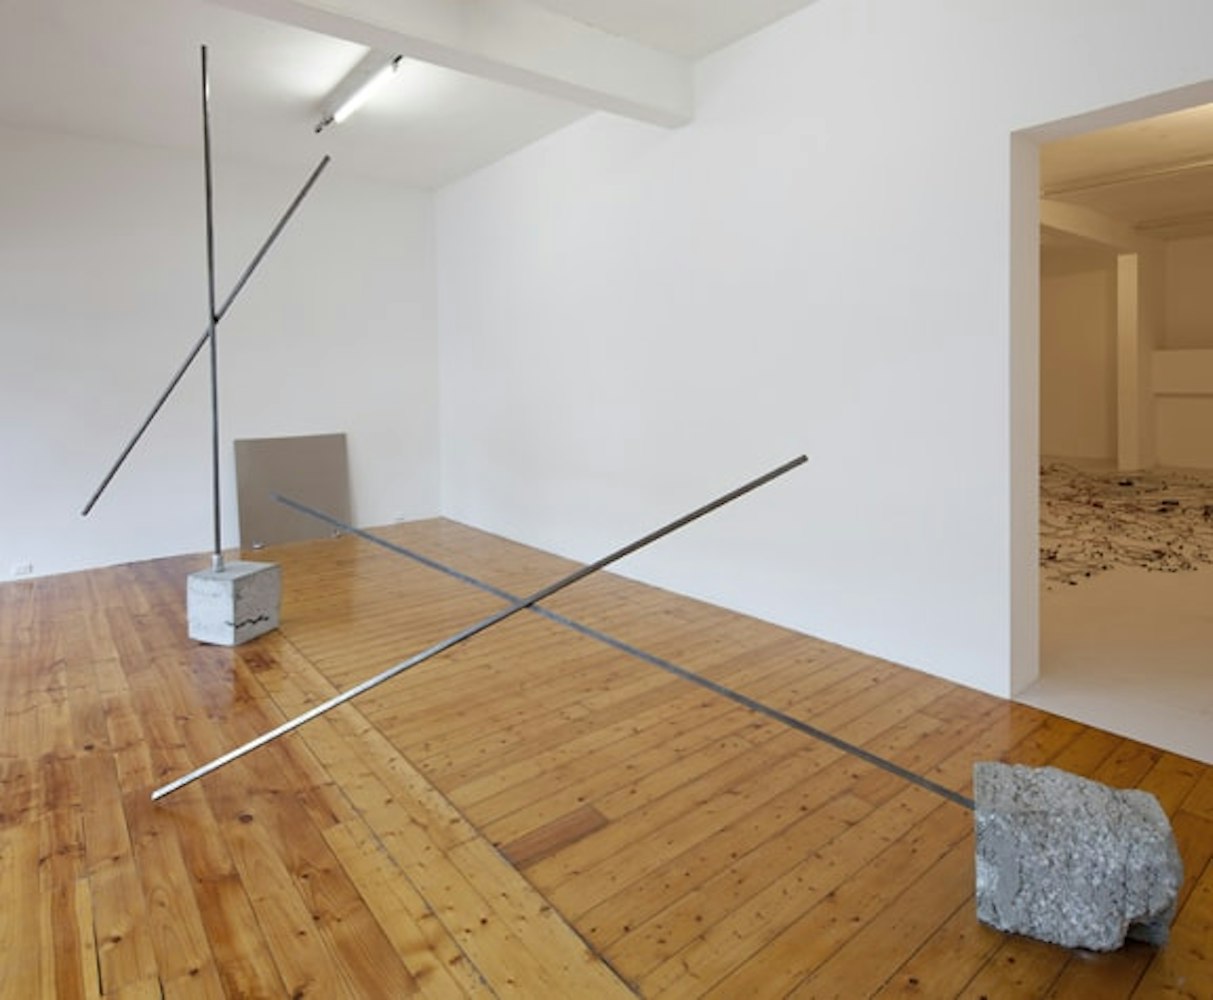 Pat Foster and Jed Berean, Double Negatives, 2011, installation at Gertrude Contemporary. Image courtesy of the Gertrude Contemporary archives.